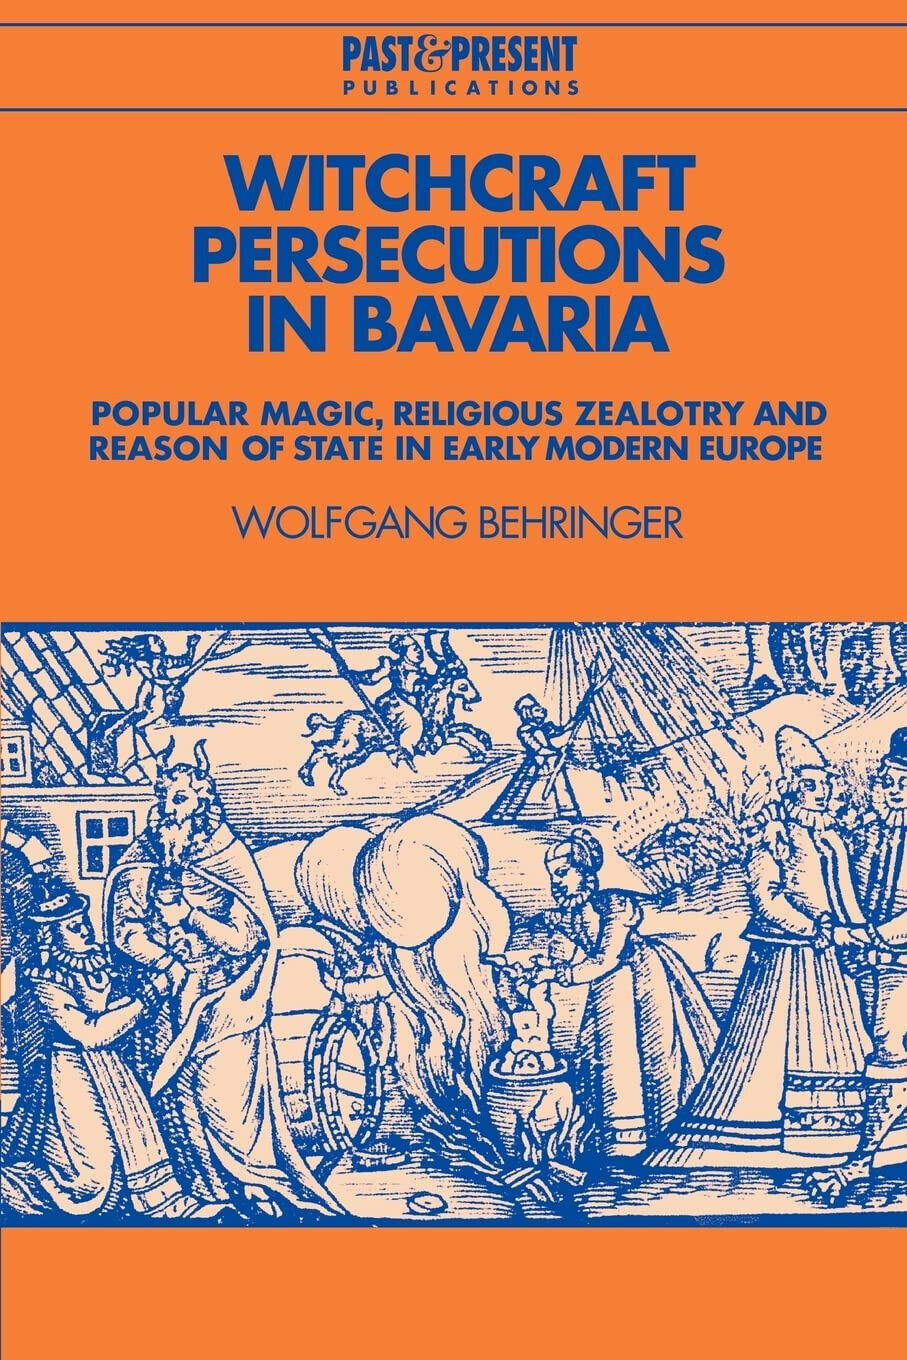 Witchcraft Persecutions in Bavaria - Wolfgang Behringer - Cambridge, 2022